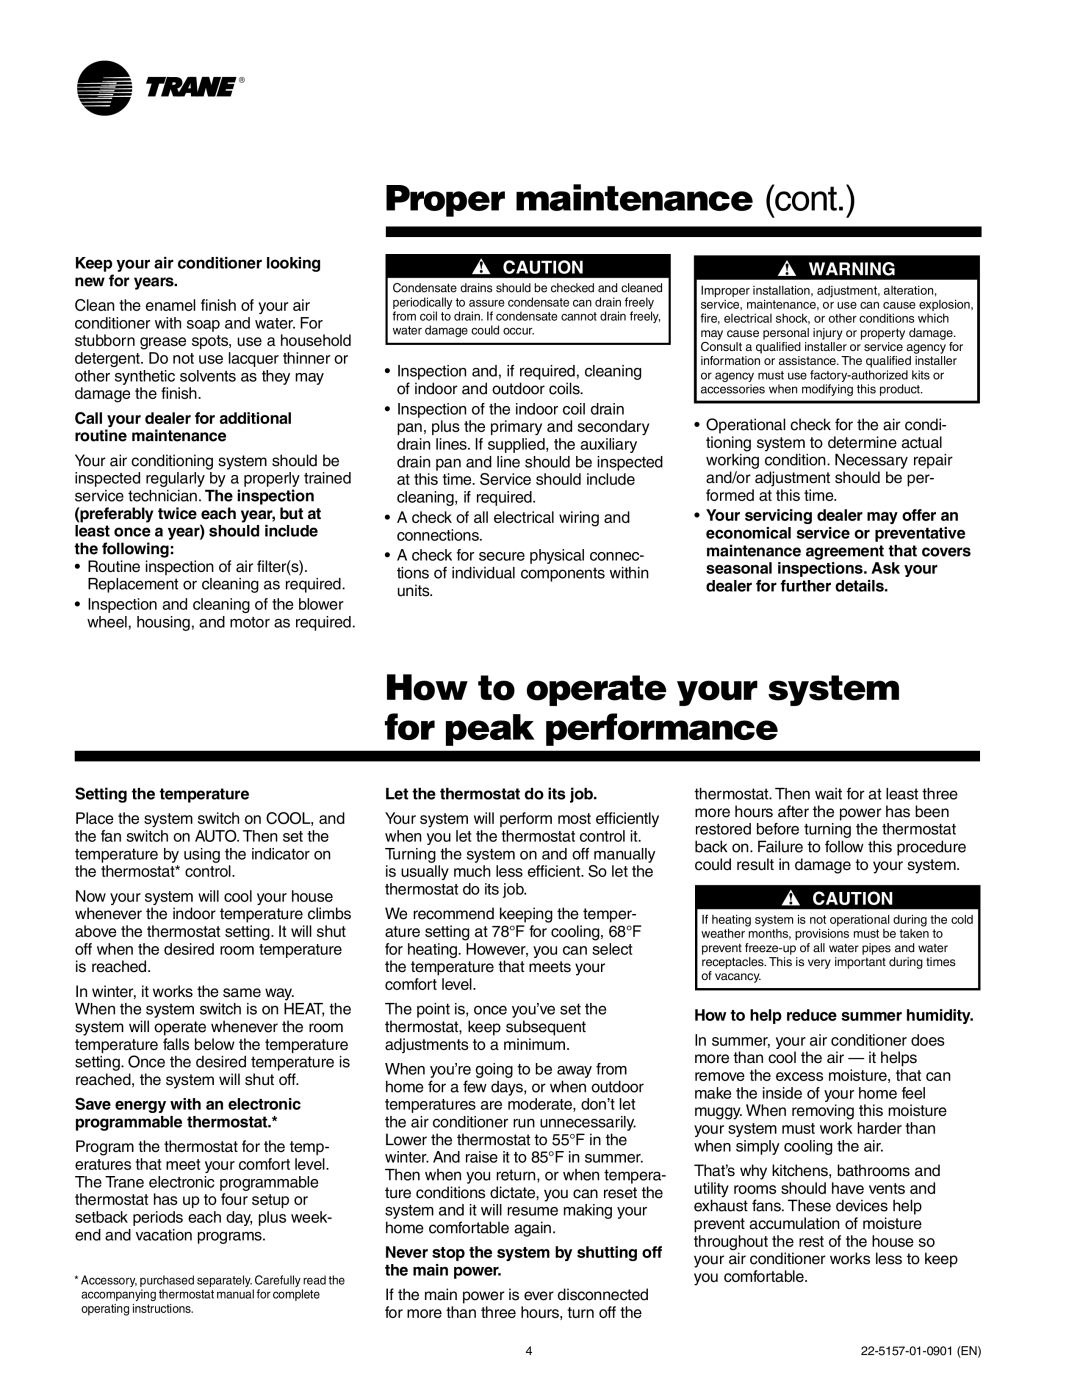 Trane Central Air Conditioning manual Proper maintenance cont, How to operate your system for peak performance 